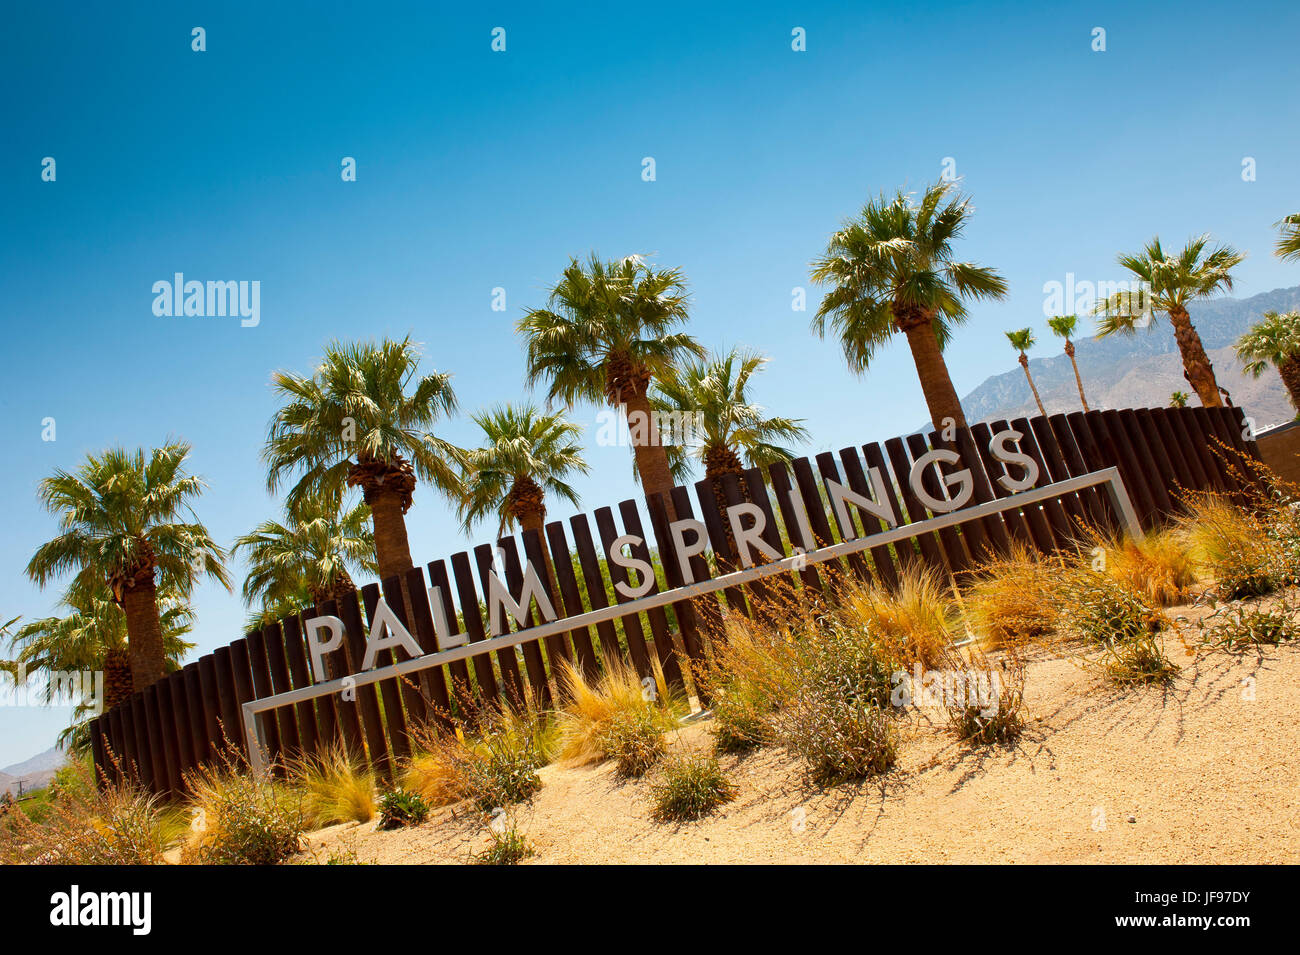 Palm Springs sign at city limits Stock Photo